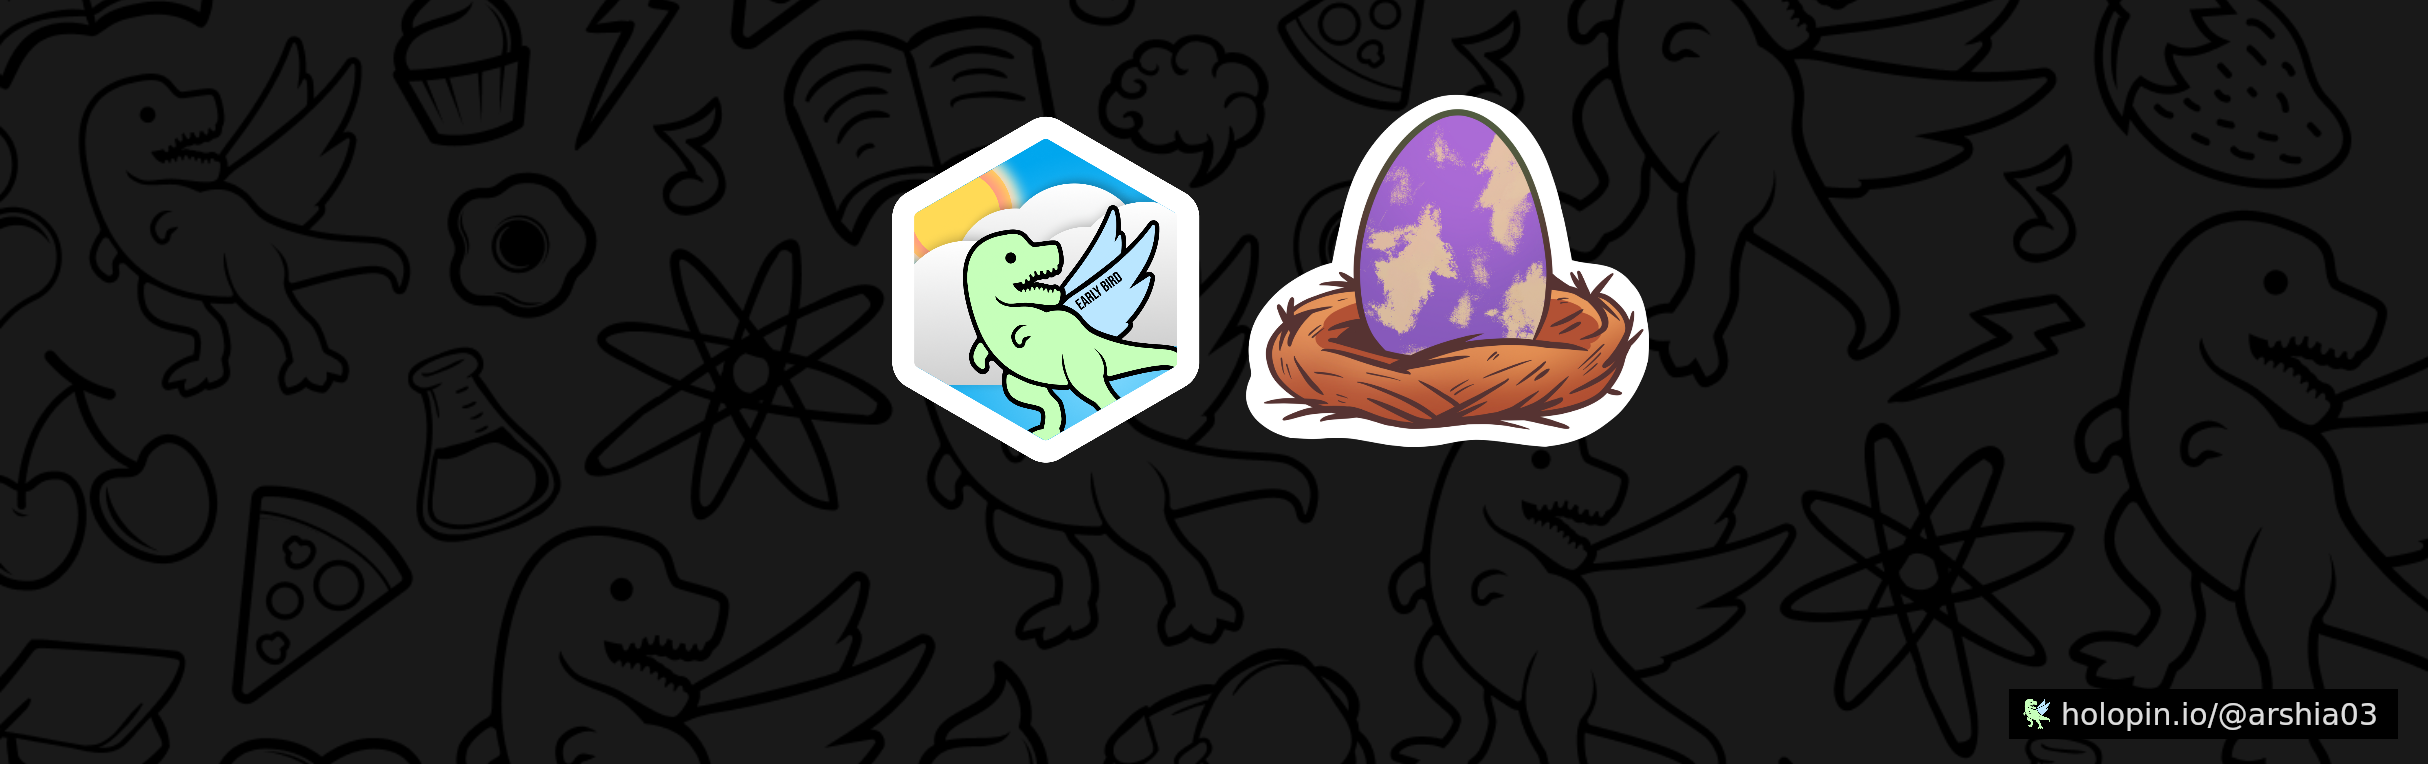 An image of @arshia03's Holopin badges, which is a link to view their full Holopin profile